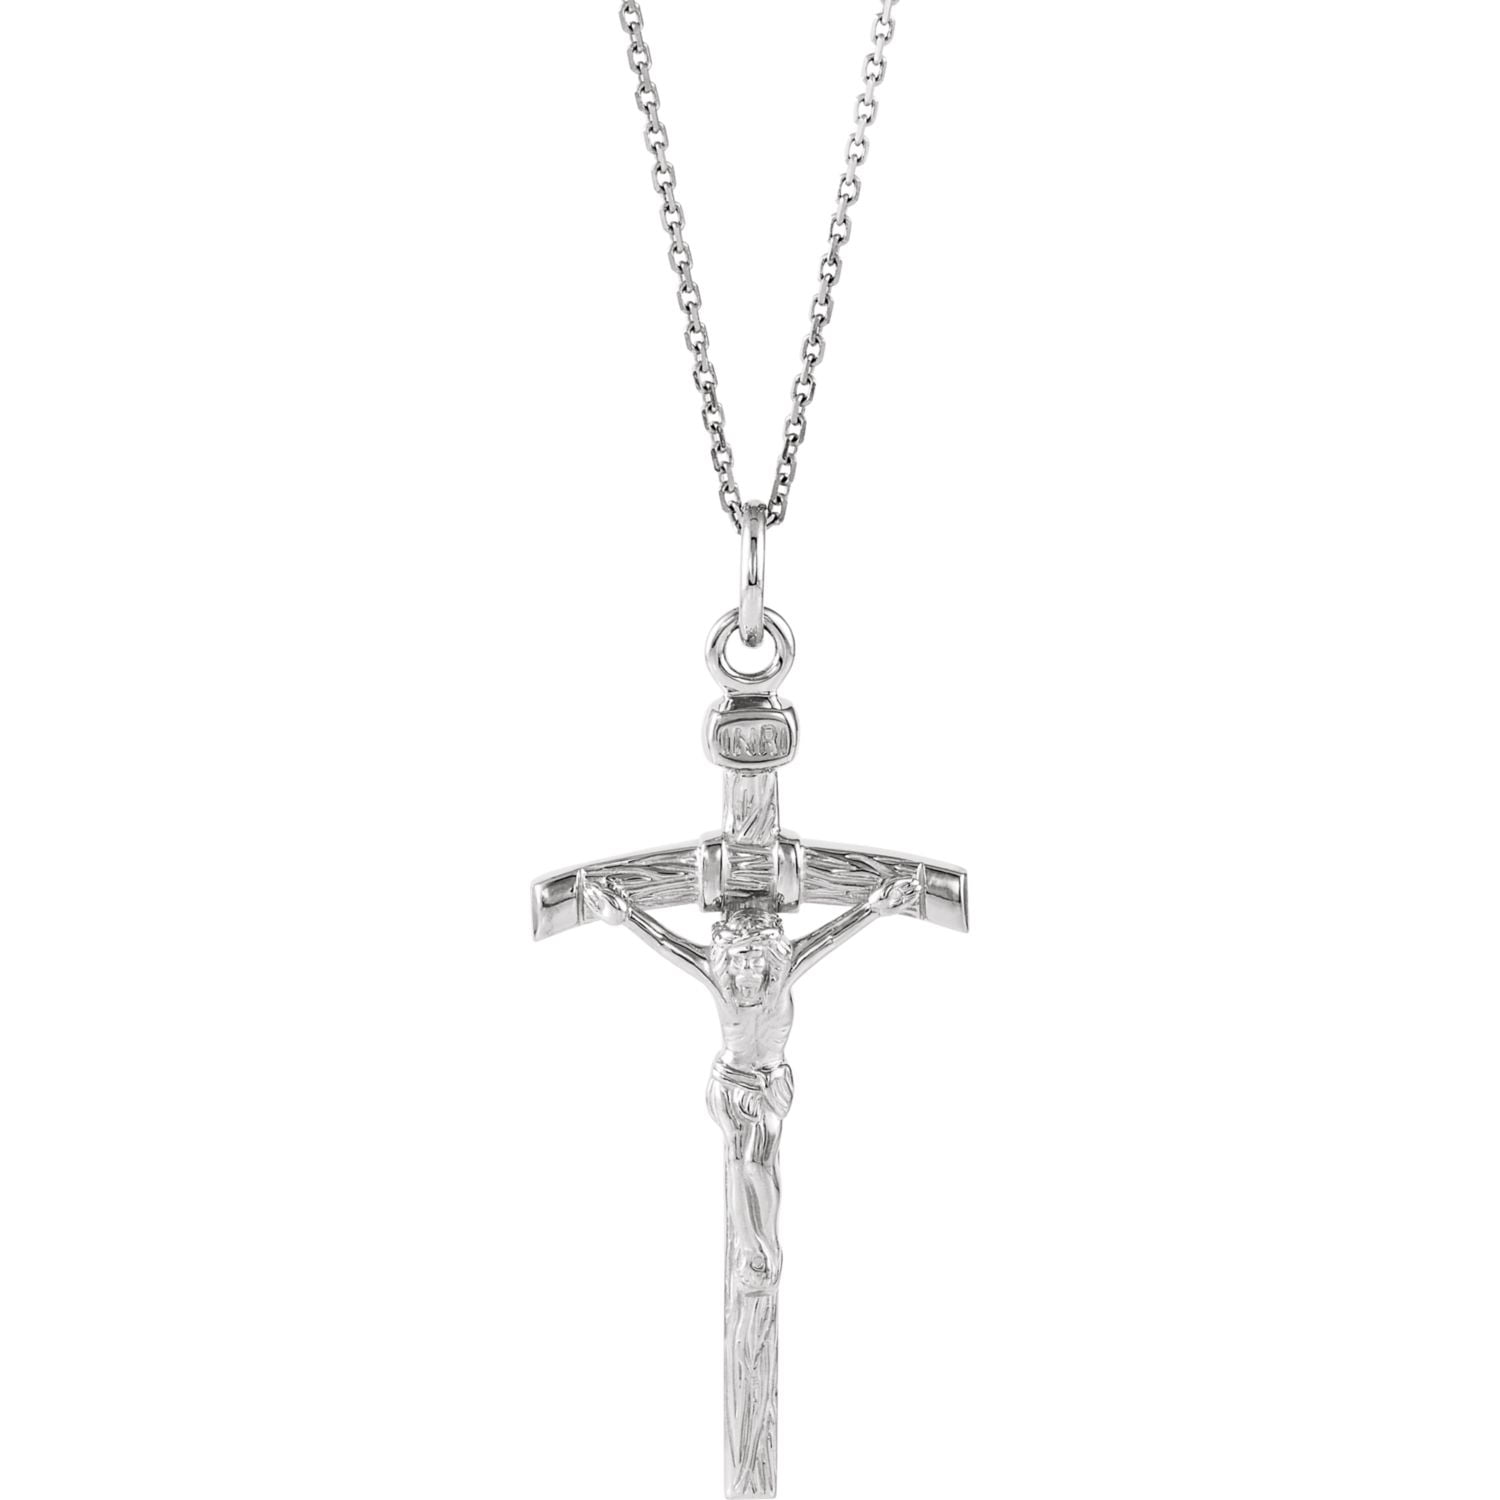 NEW 925 Sterling Silver CROSS CRUCIFIX Charm PENDANT various sizes GOOD QUALITY